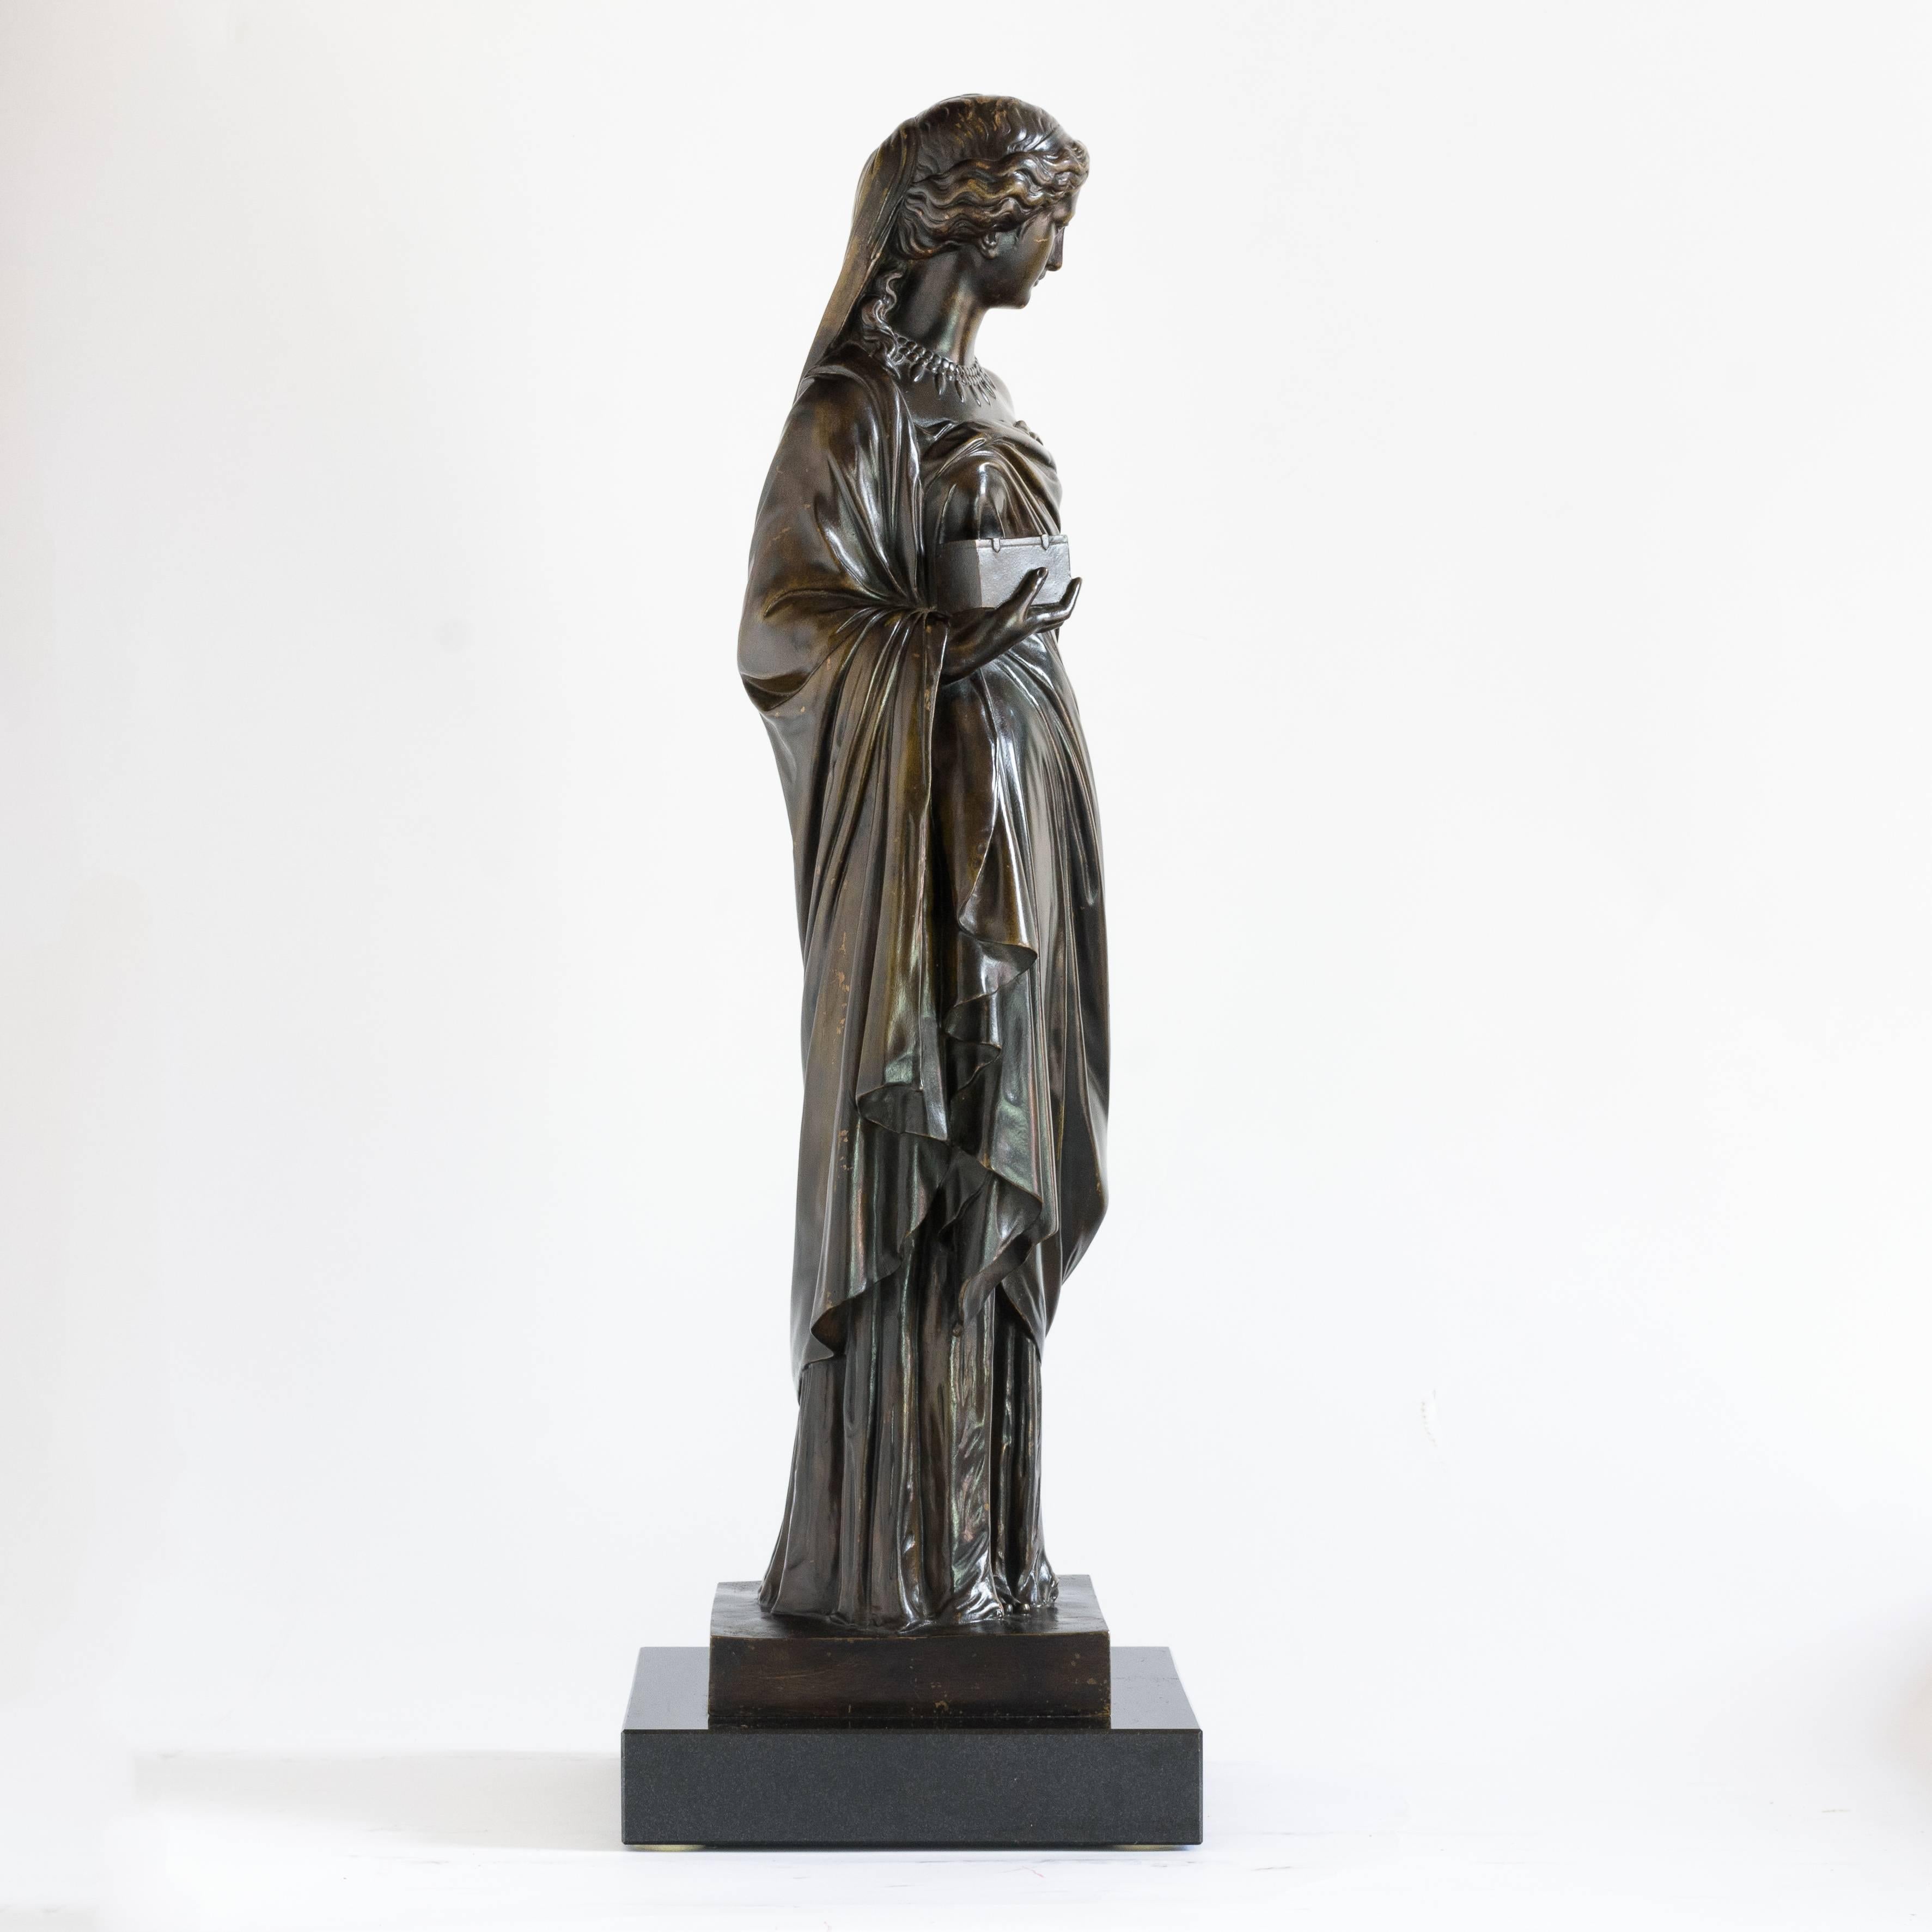 Cast French Bronze of Pandora, Barbedienne Foundry